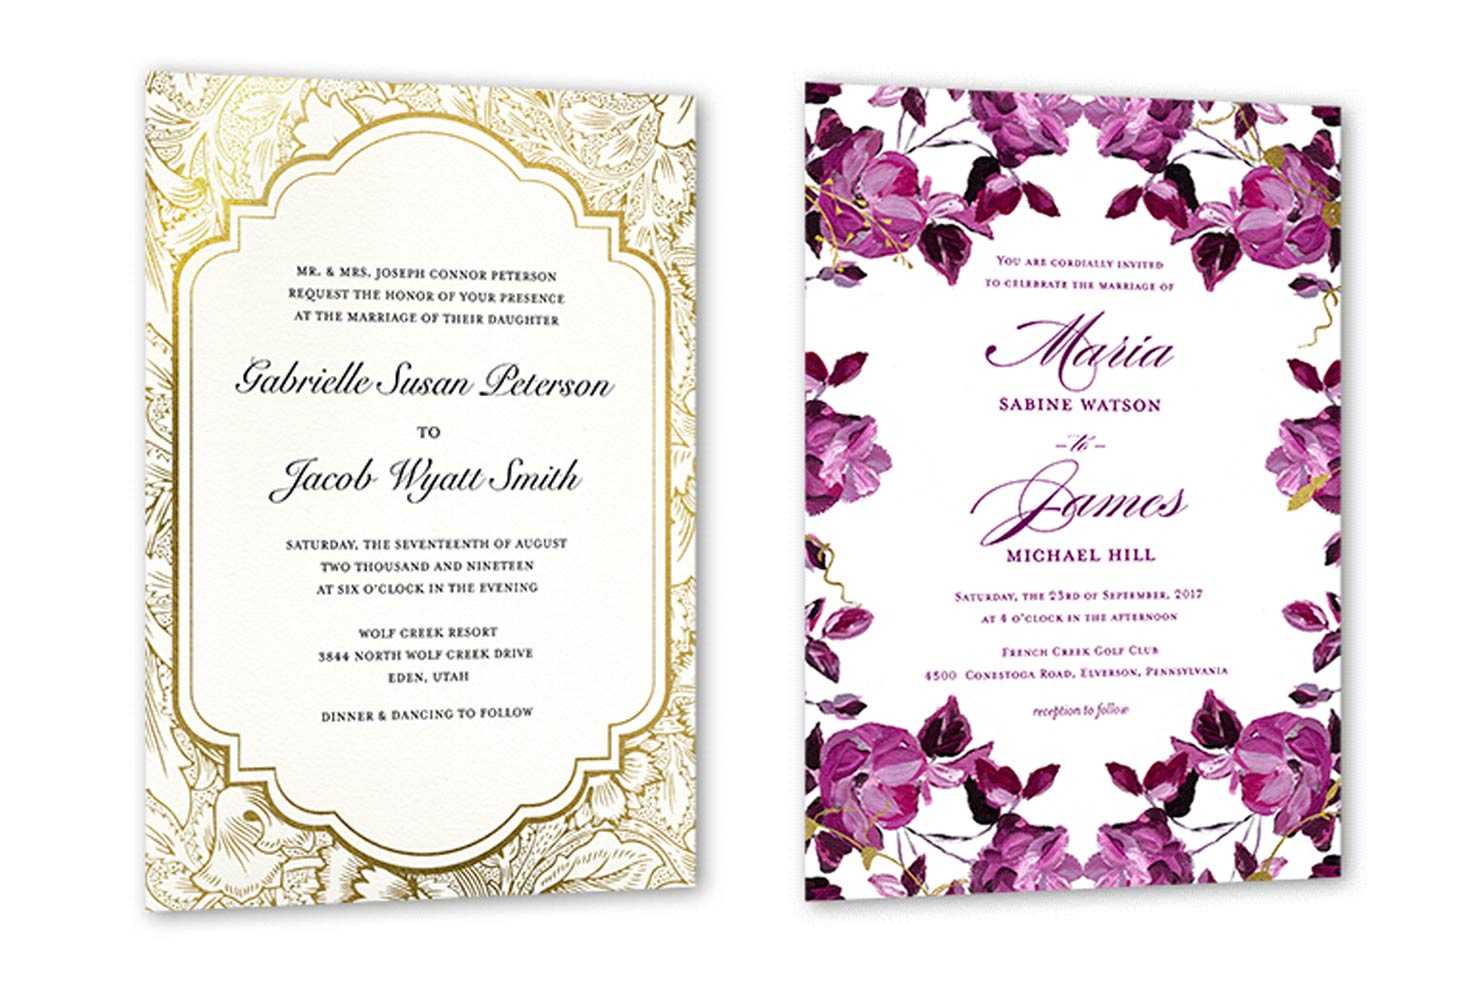 35+ Wedding Invitation Wording Examples 2020 | Shutterfly With Sample Wedding Invitation Cards Templates